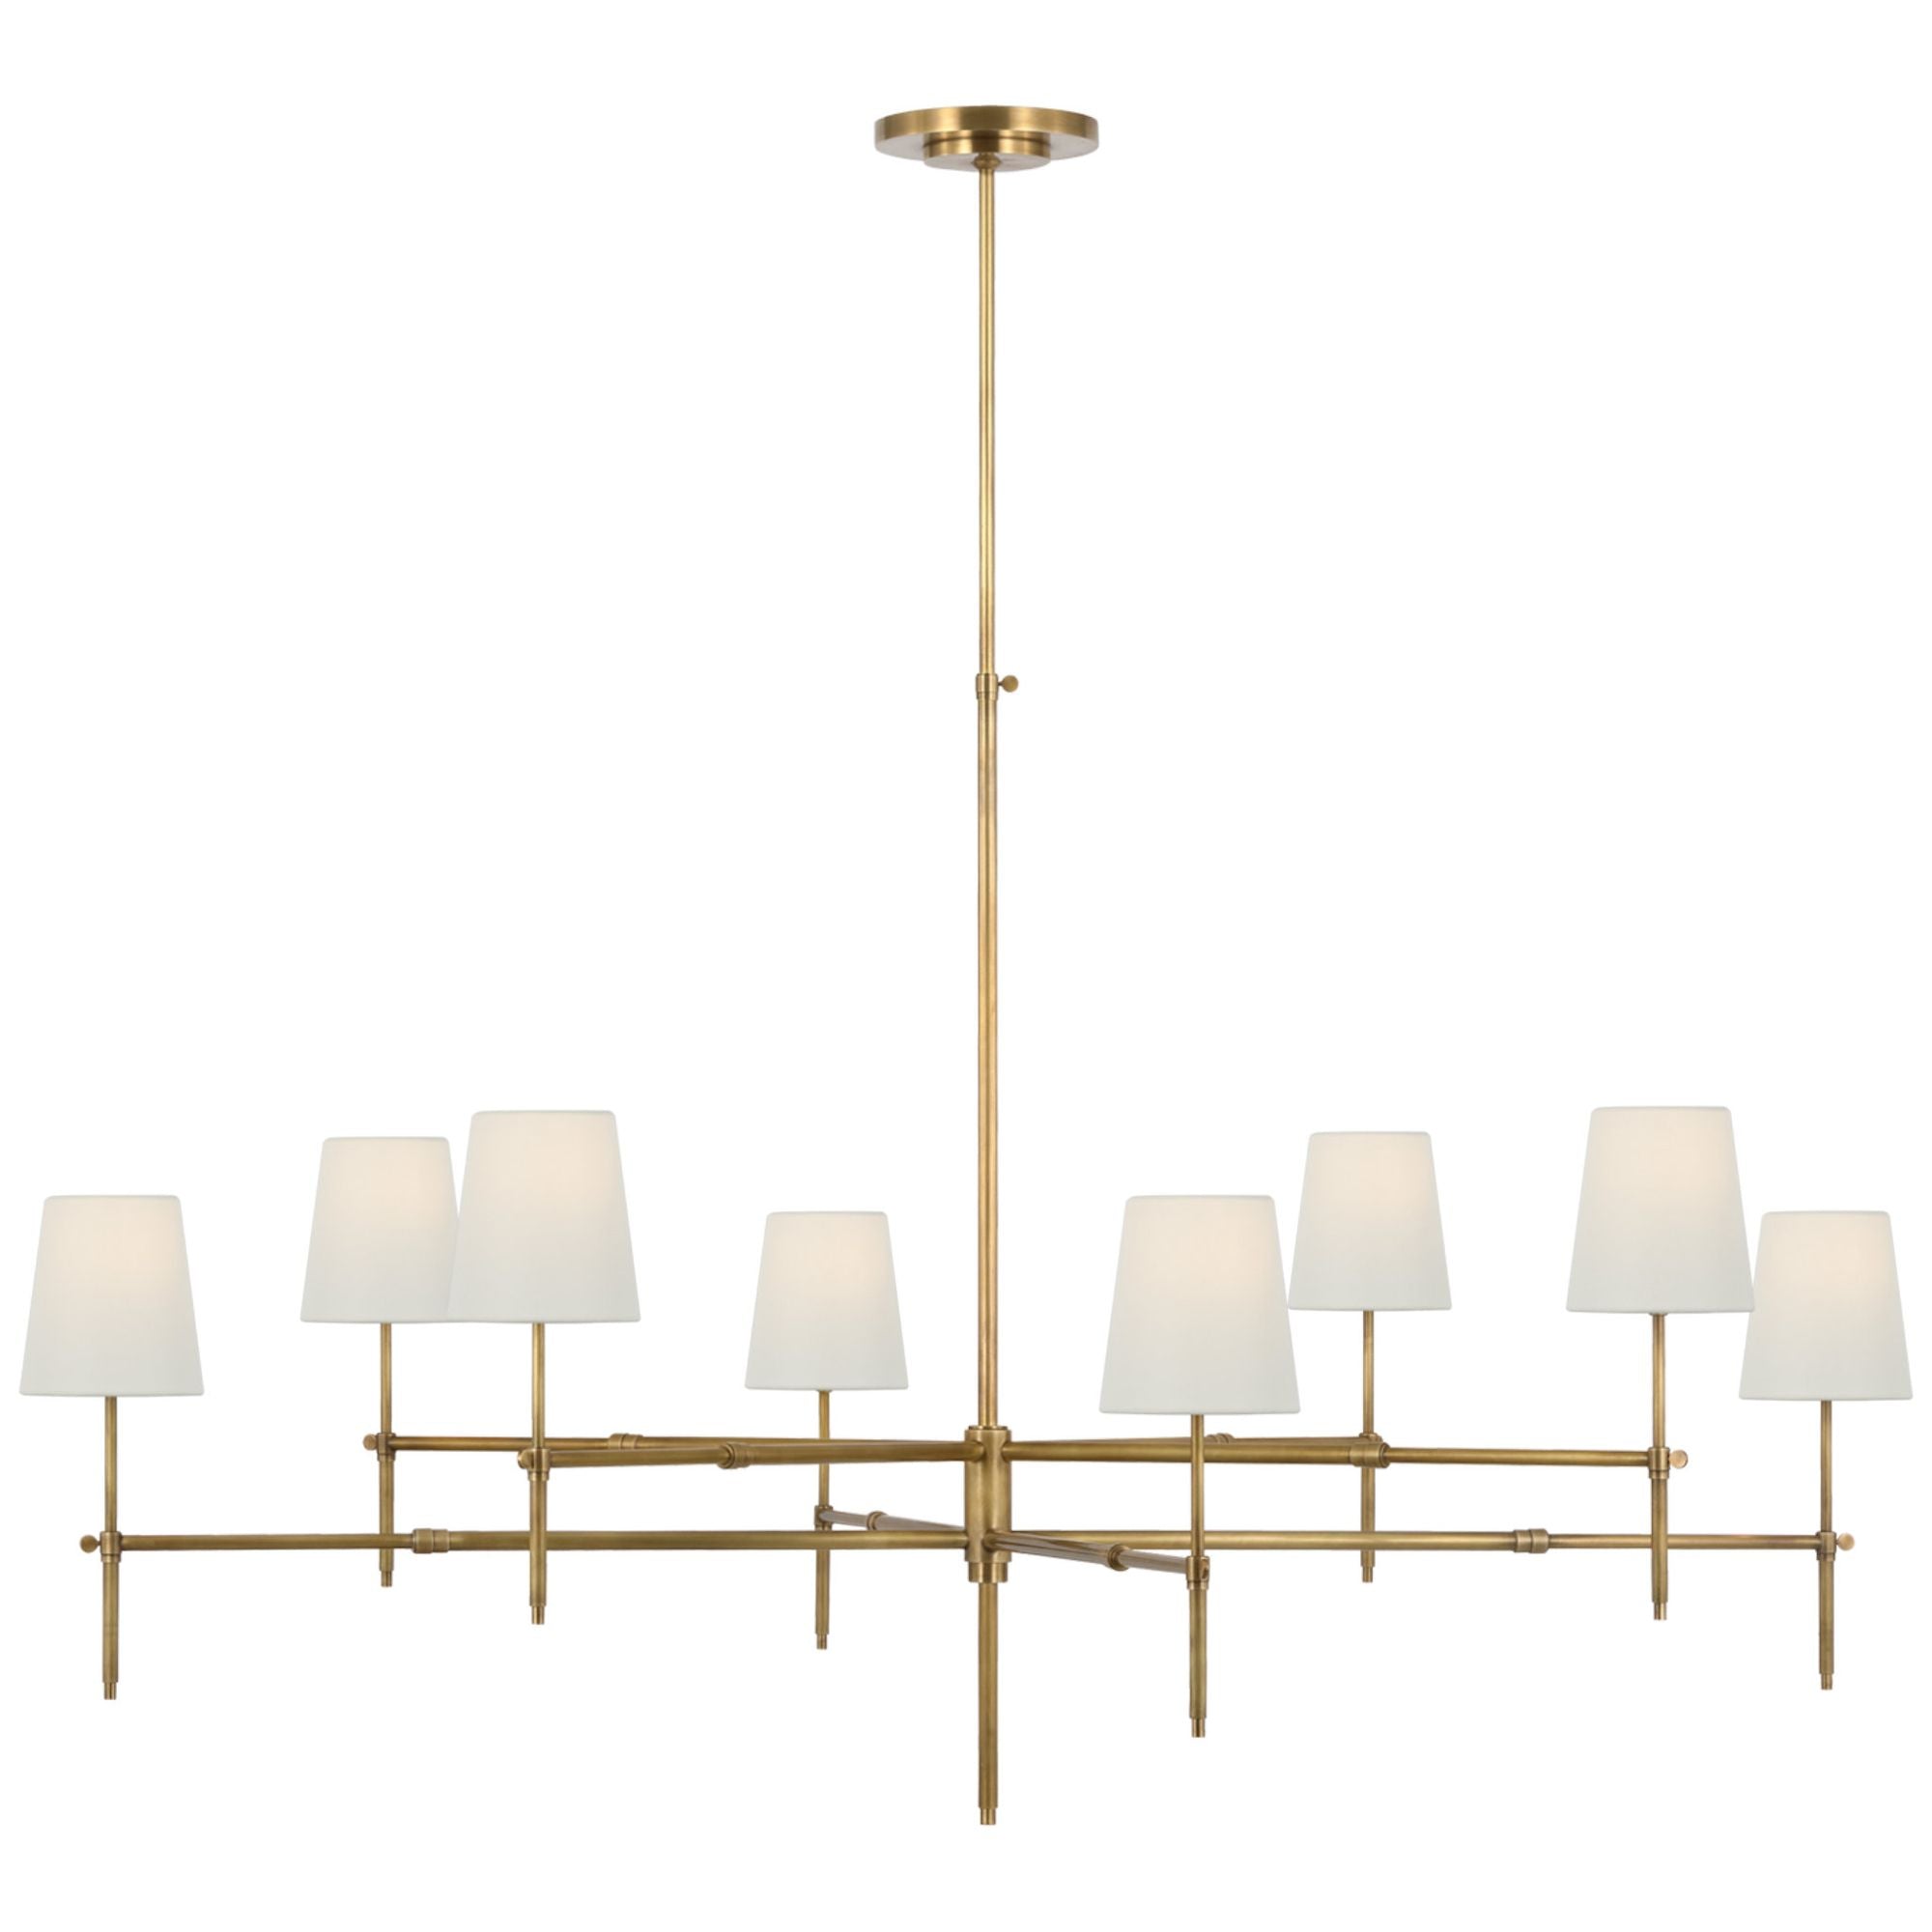 Thomas O'Brien Bryant Small Wrapped Chandelier in Hand-Rubbed Antique Brass  and Chocolate Leather with Linen Shades